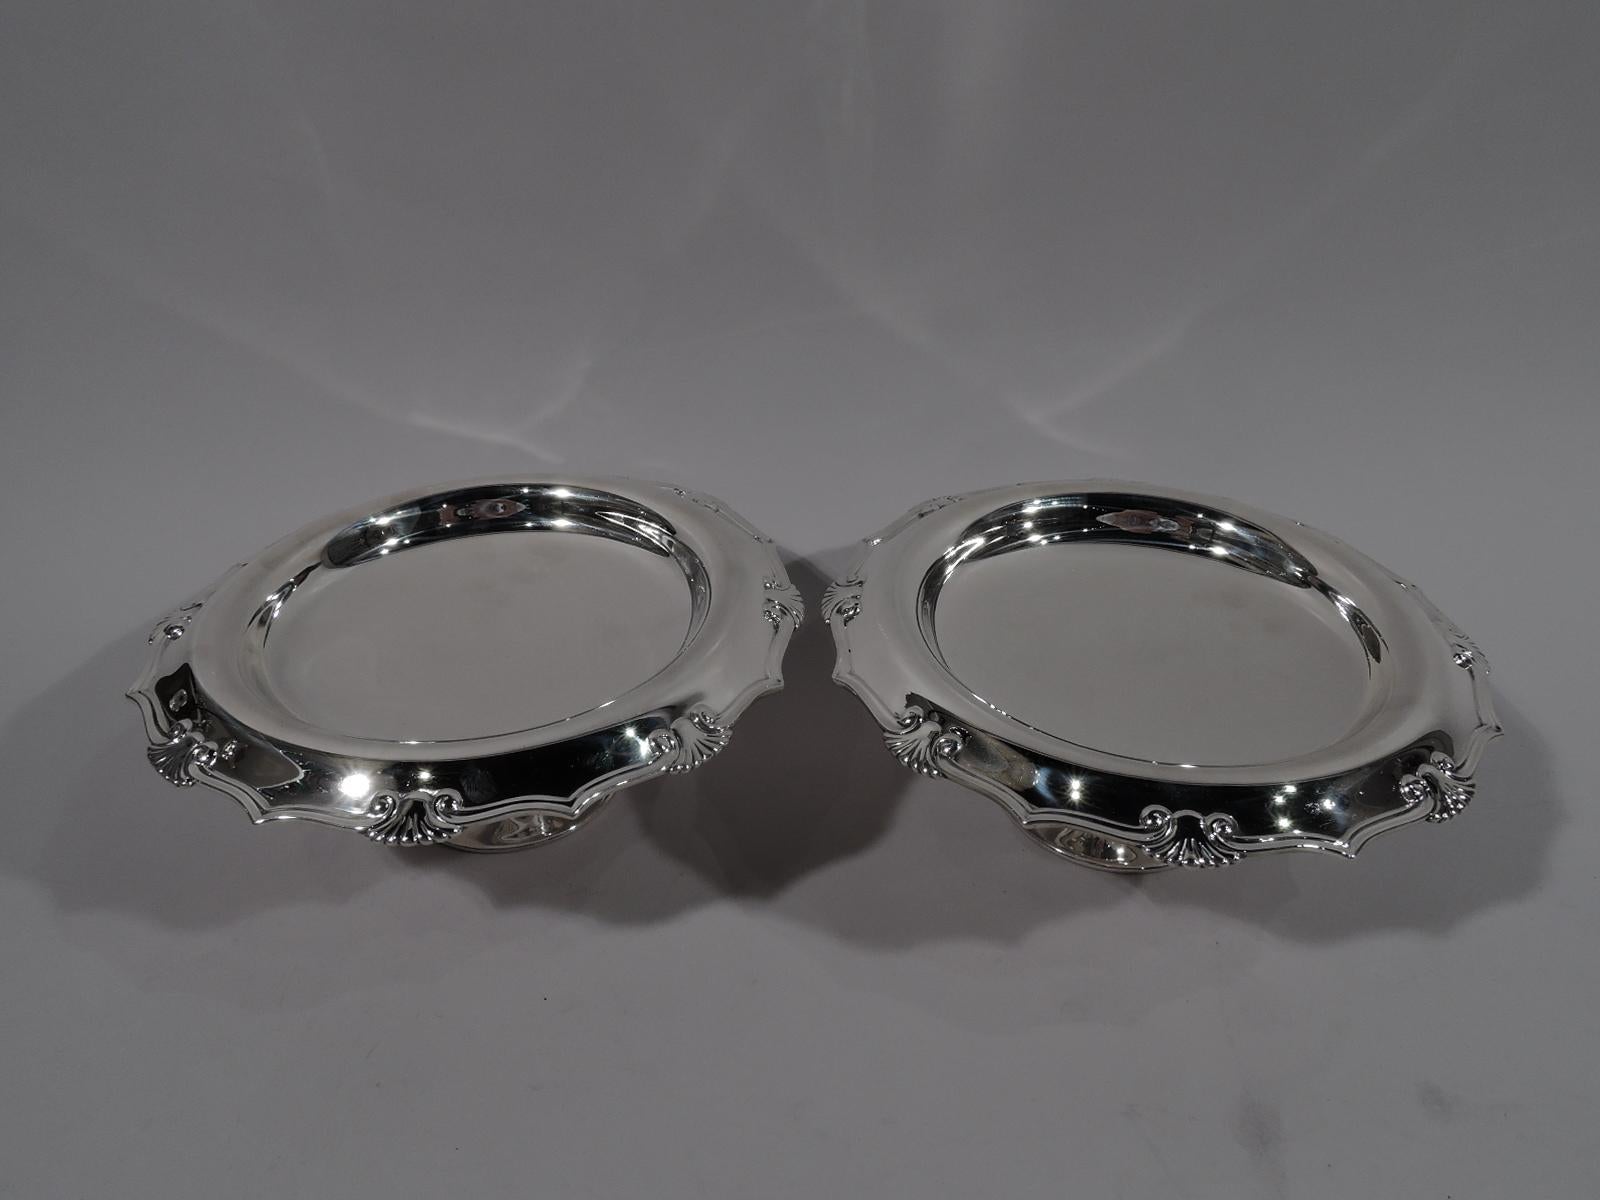 Modern Classical sterling silver compotes. Made by Tiffany & Co. in New York, circa 1910. Each: Deep well and turned-down molded ogee rim interspersed with stylized scallop shells. Short support flowing into raised foot. Fully marked including